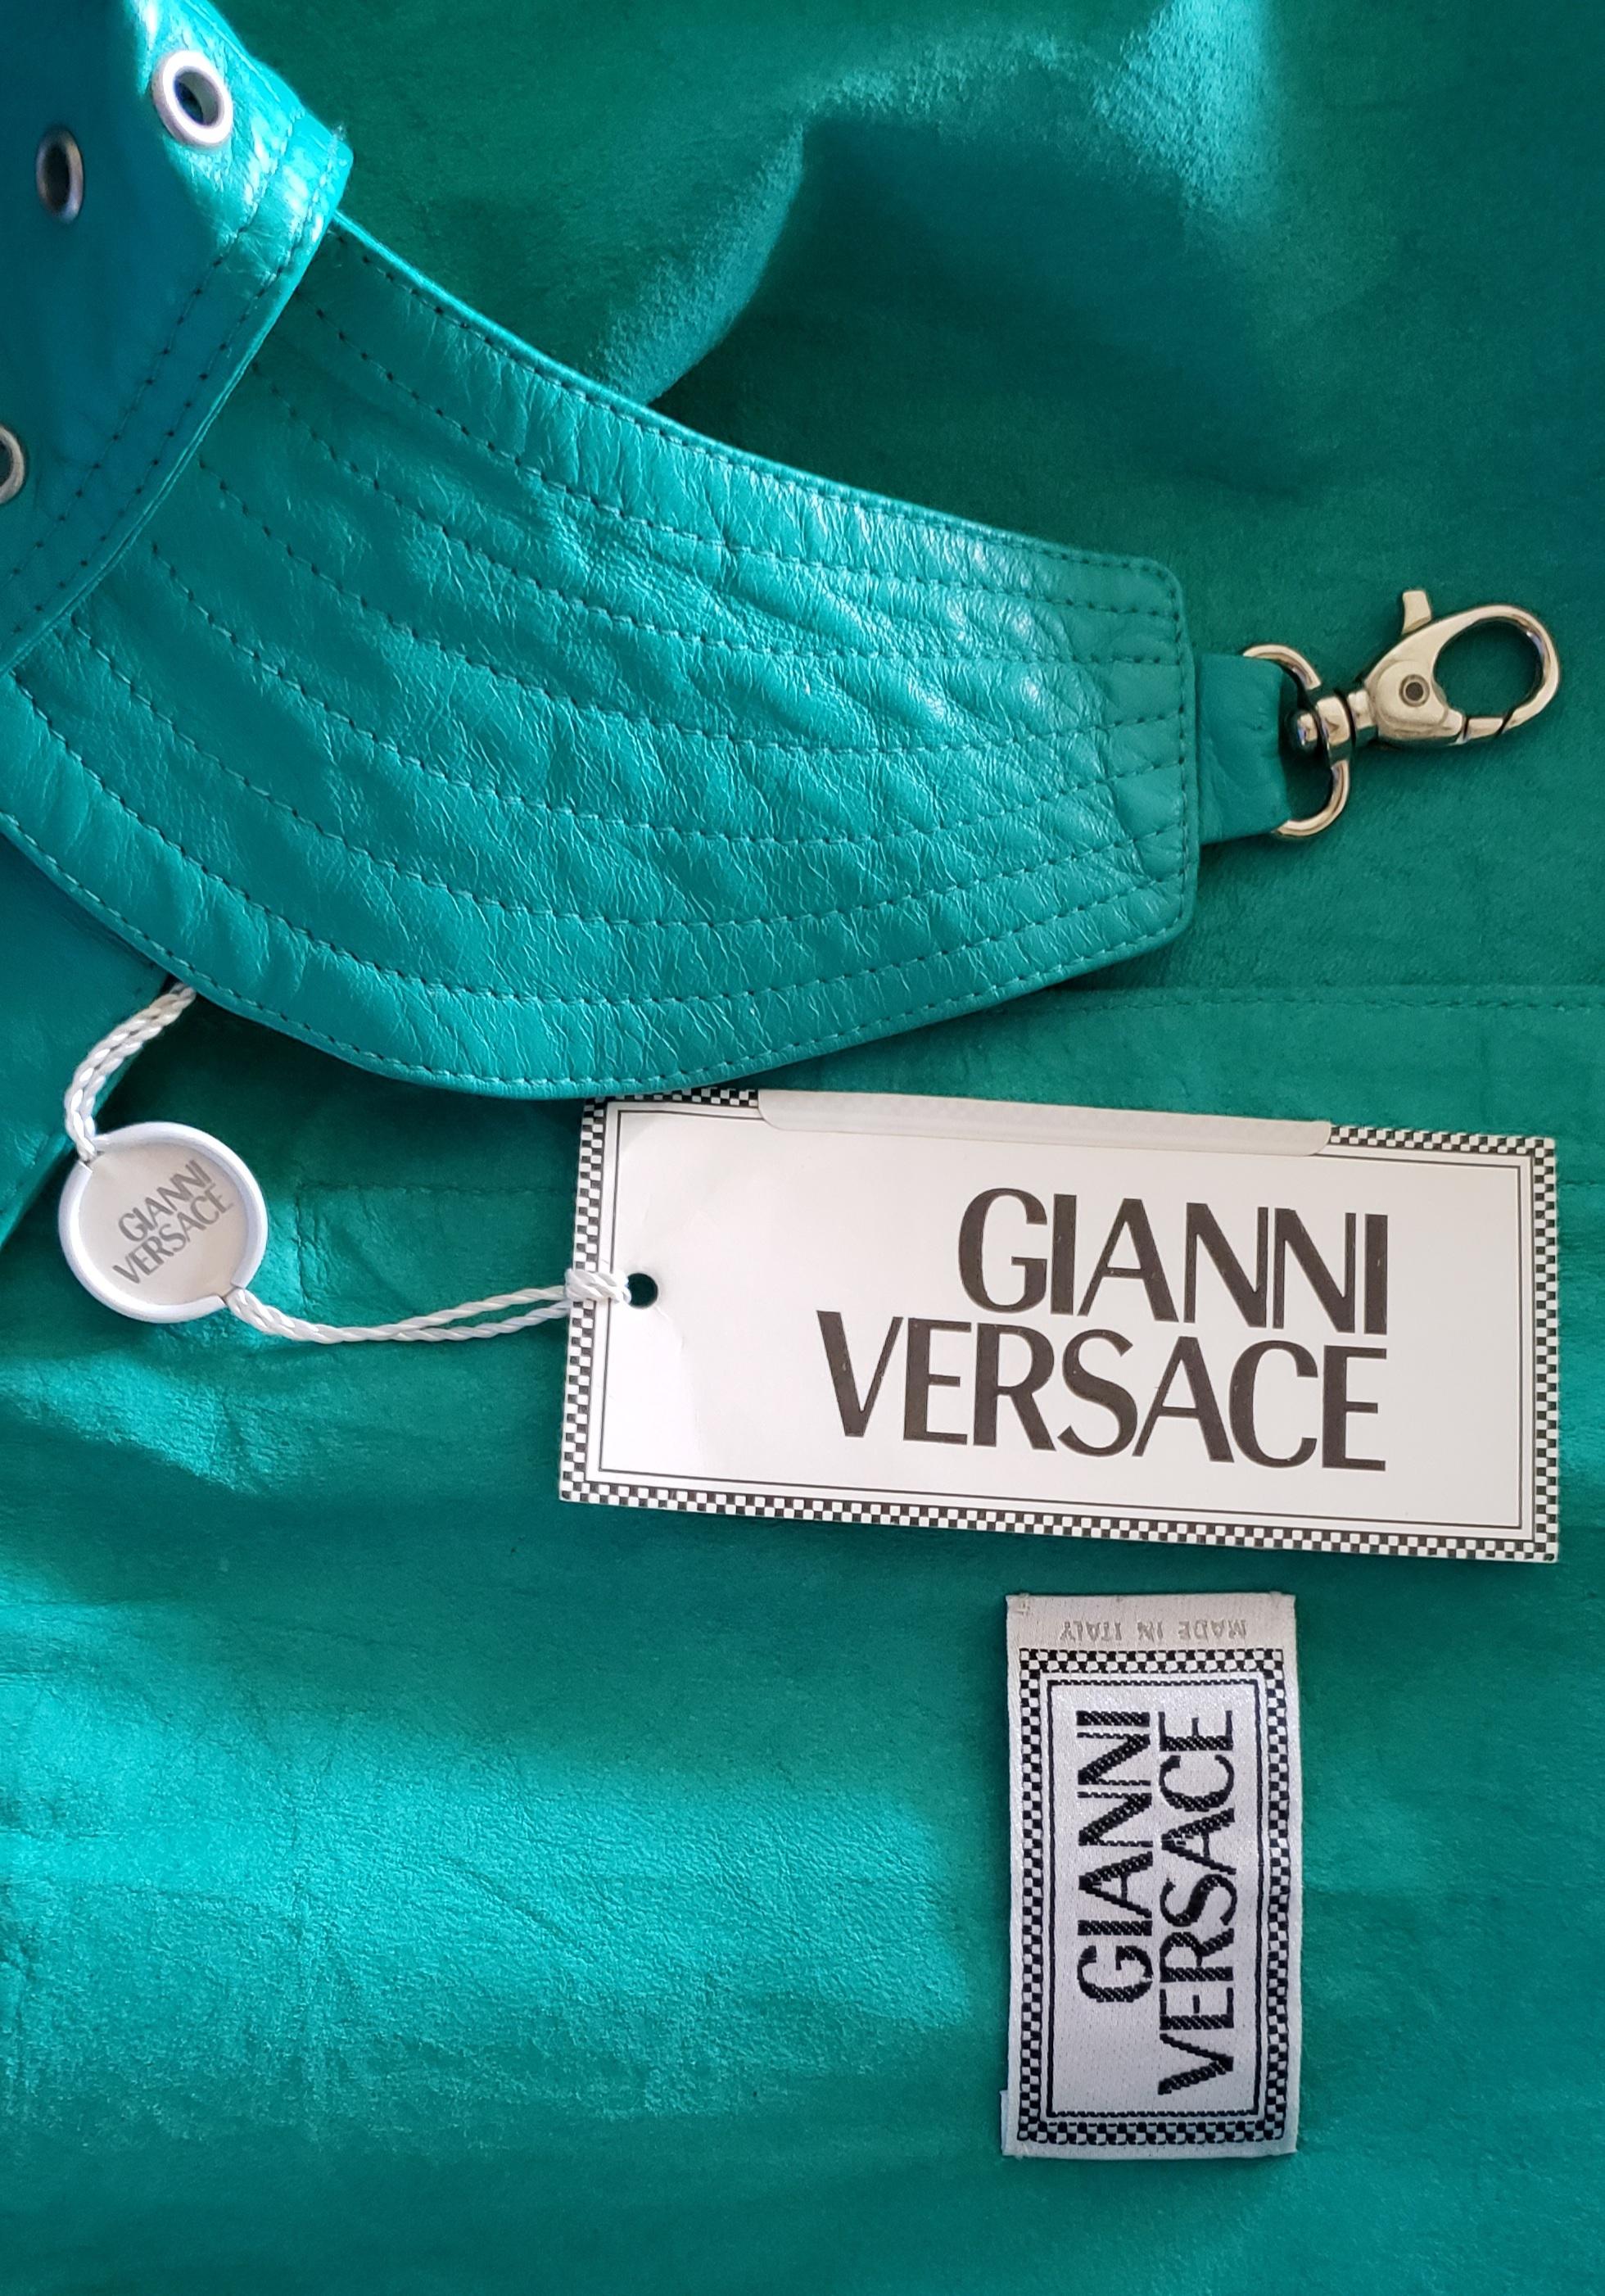 NEW GIANNI VERSACE EMERALD GREEN LEATHER JACKET with RIVETS Sz IT 40 - US 4/6 For Sale 12